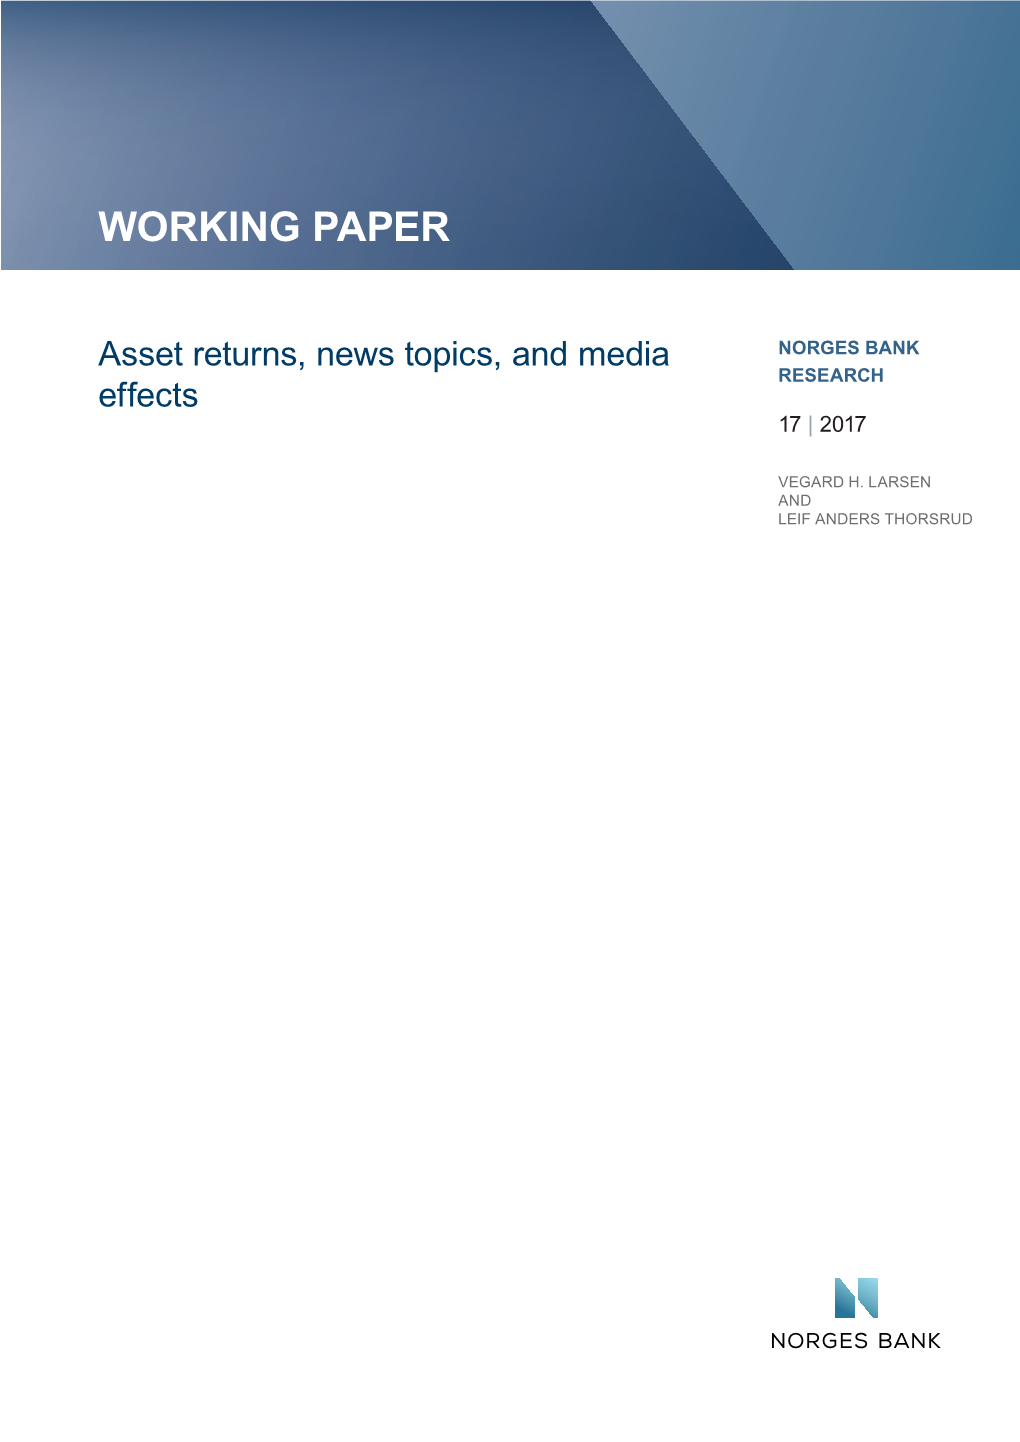 Working Paper 17/2017: Asset Returns, News Topics, and Media Effects